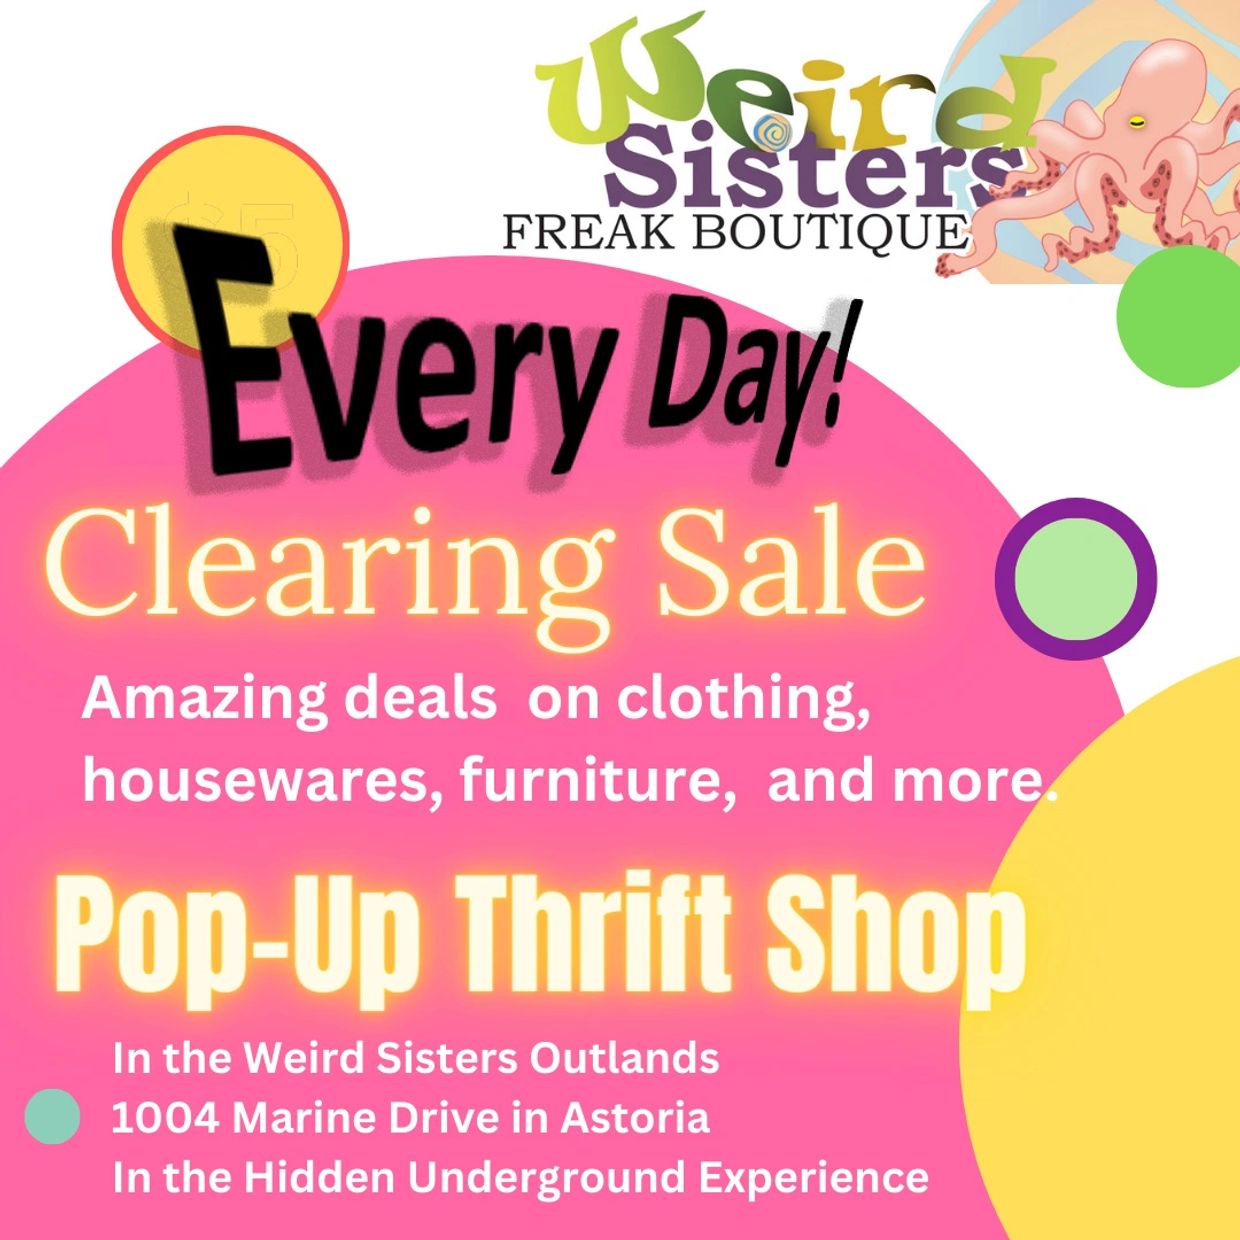 You asked for it - we listened - Clearing Sale EVERY day. 

The end of the month is still when we ma